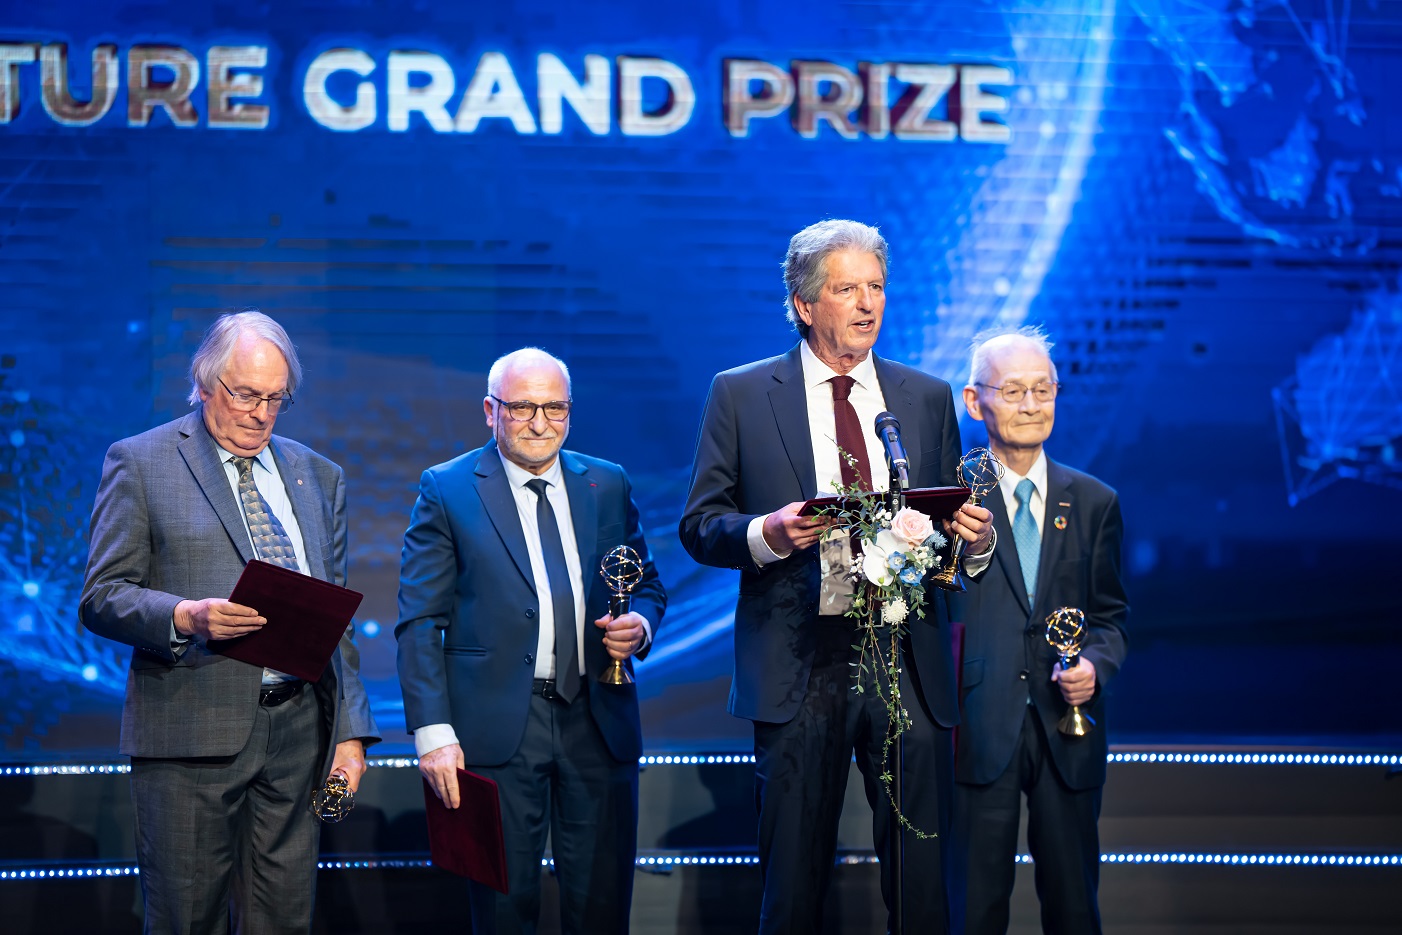 Professor Martin Andrew Green (second from right), University of New South Wales, Australia, Laureate of the 2023 VinFuture Grand Prize